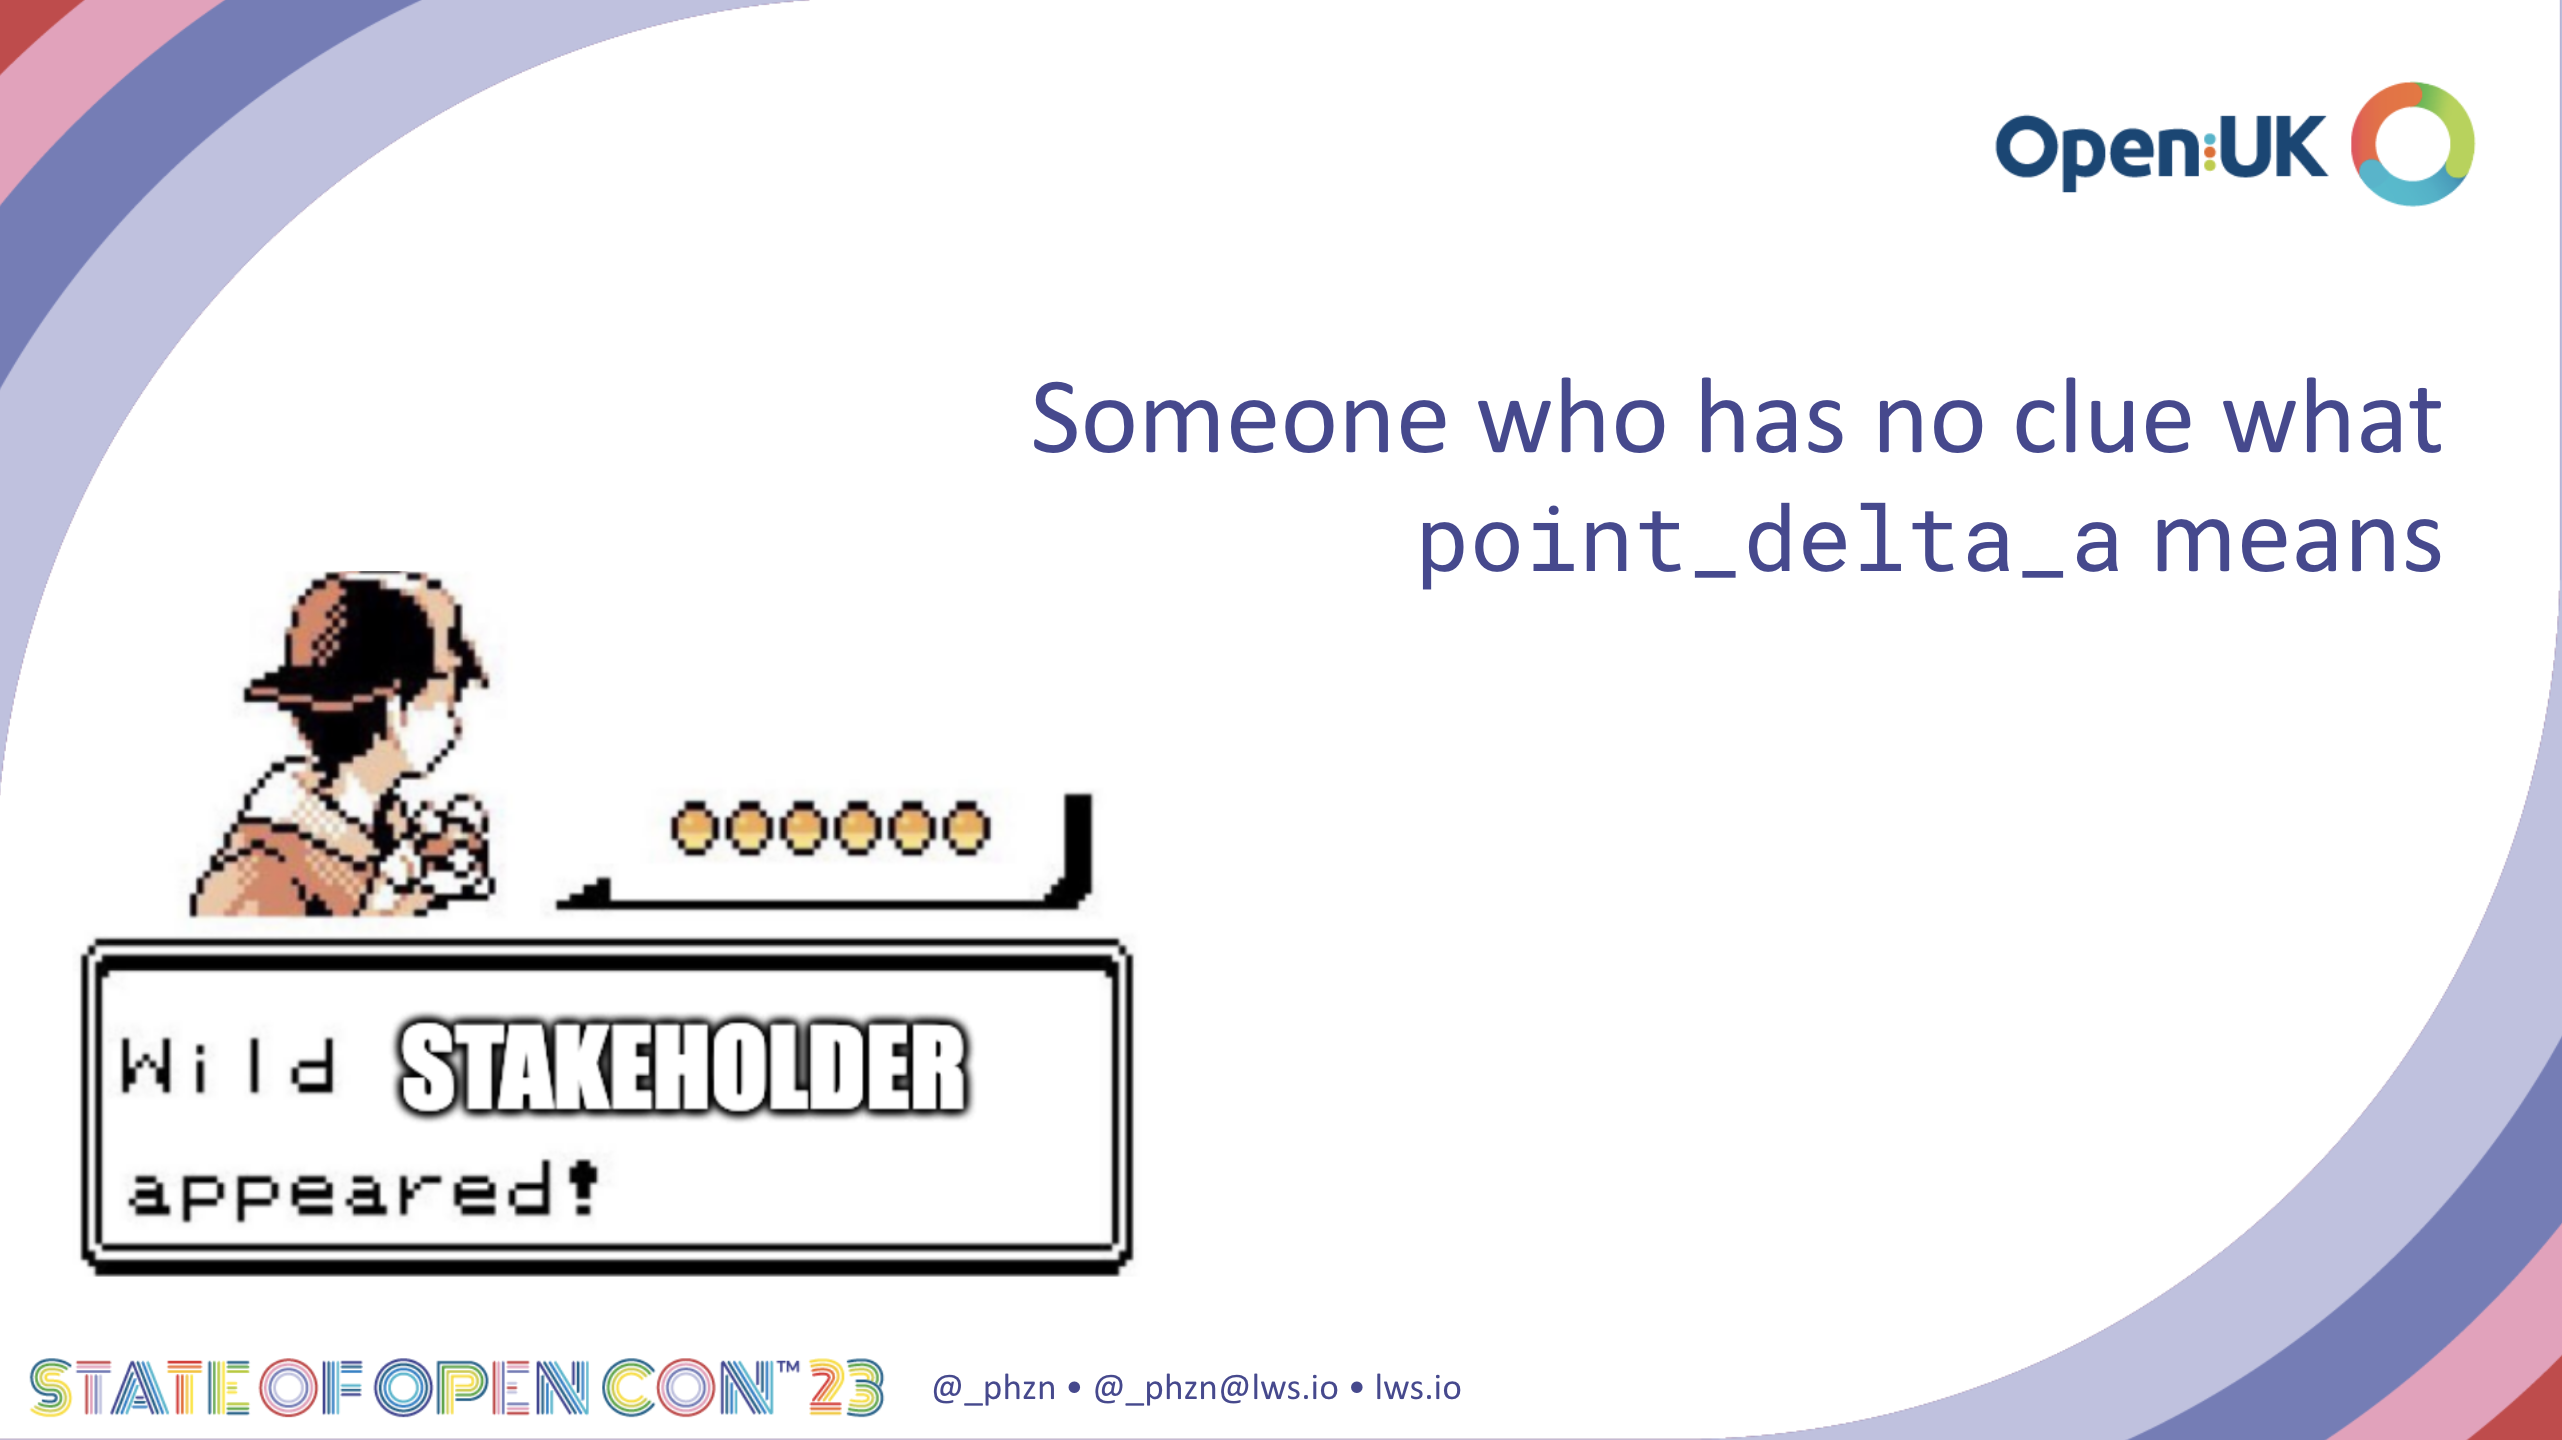 A Pokémon battle meme. On the left it reads "a new stakeholder appears". On the right it reads "someone who has no clue what point_delta_a means"